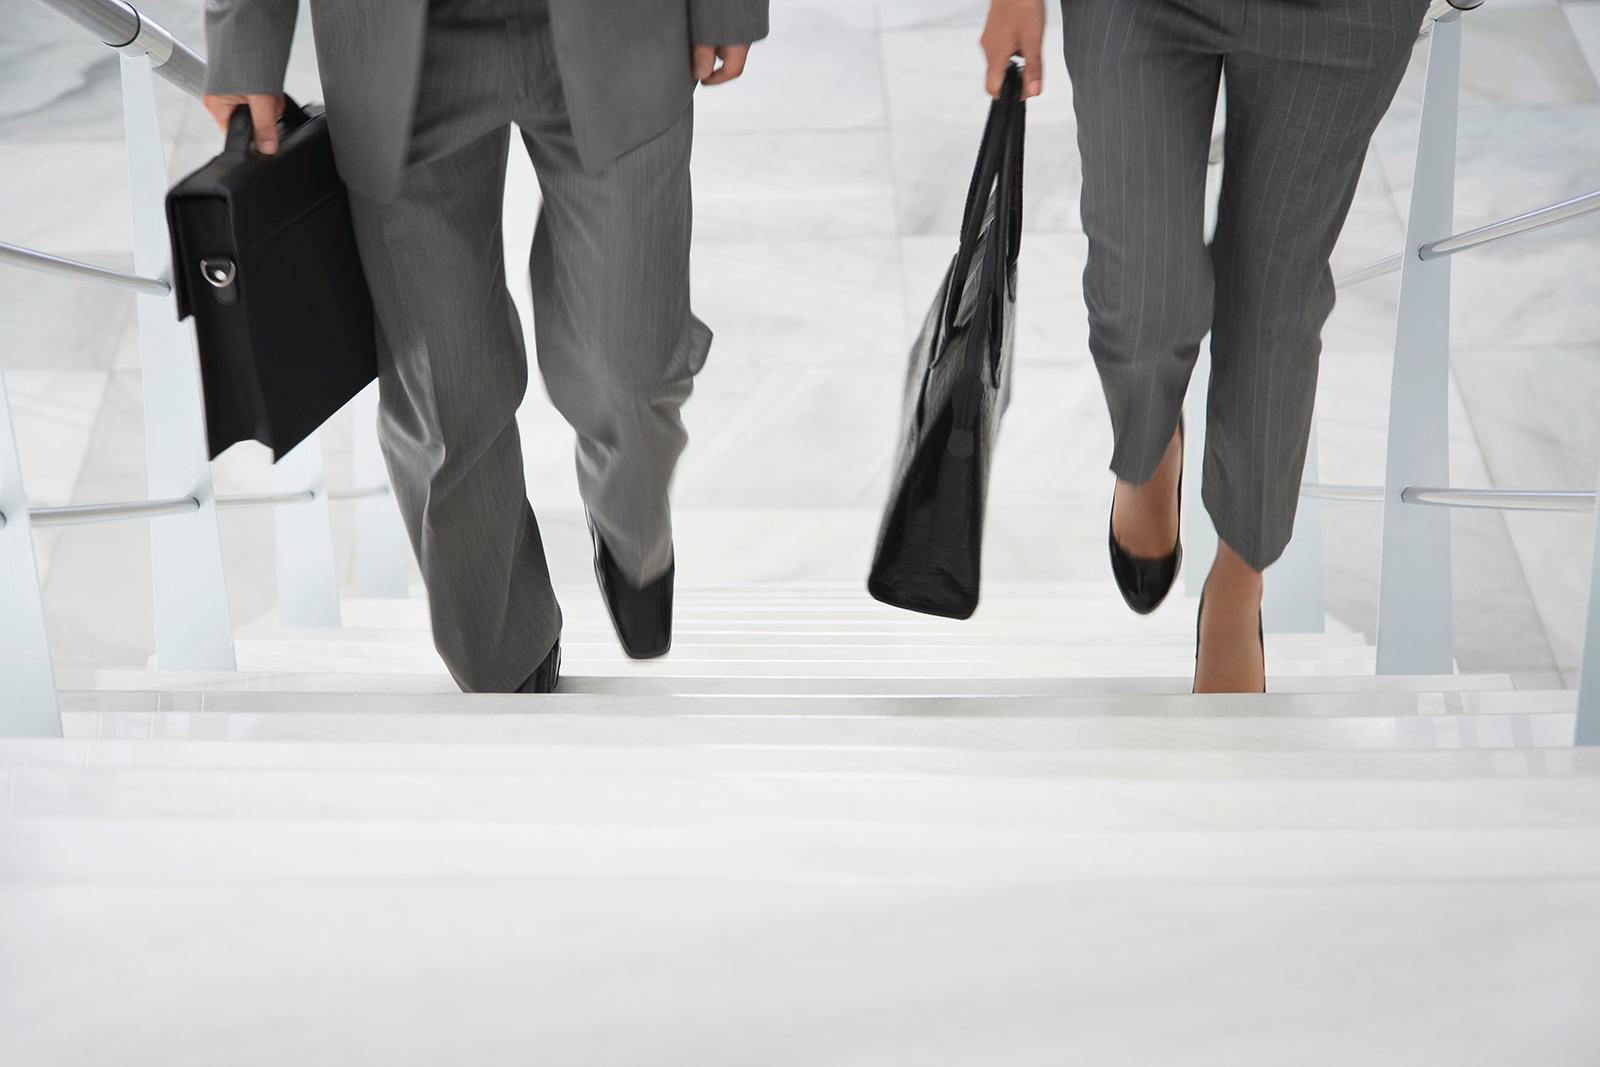 legs-only view of two businesspeople walking up stairs with briefcases in office